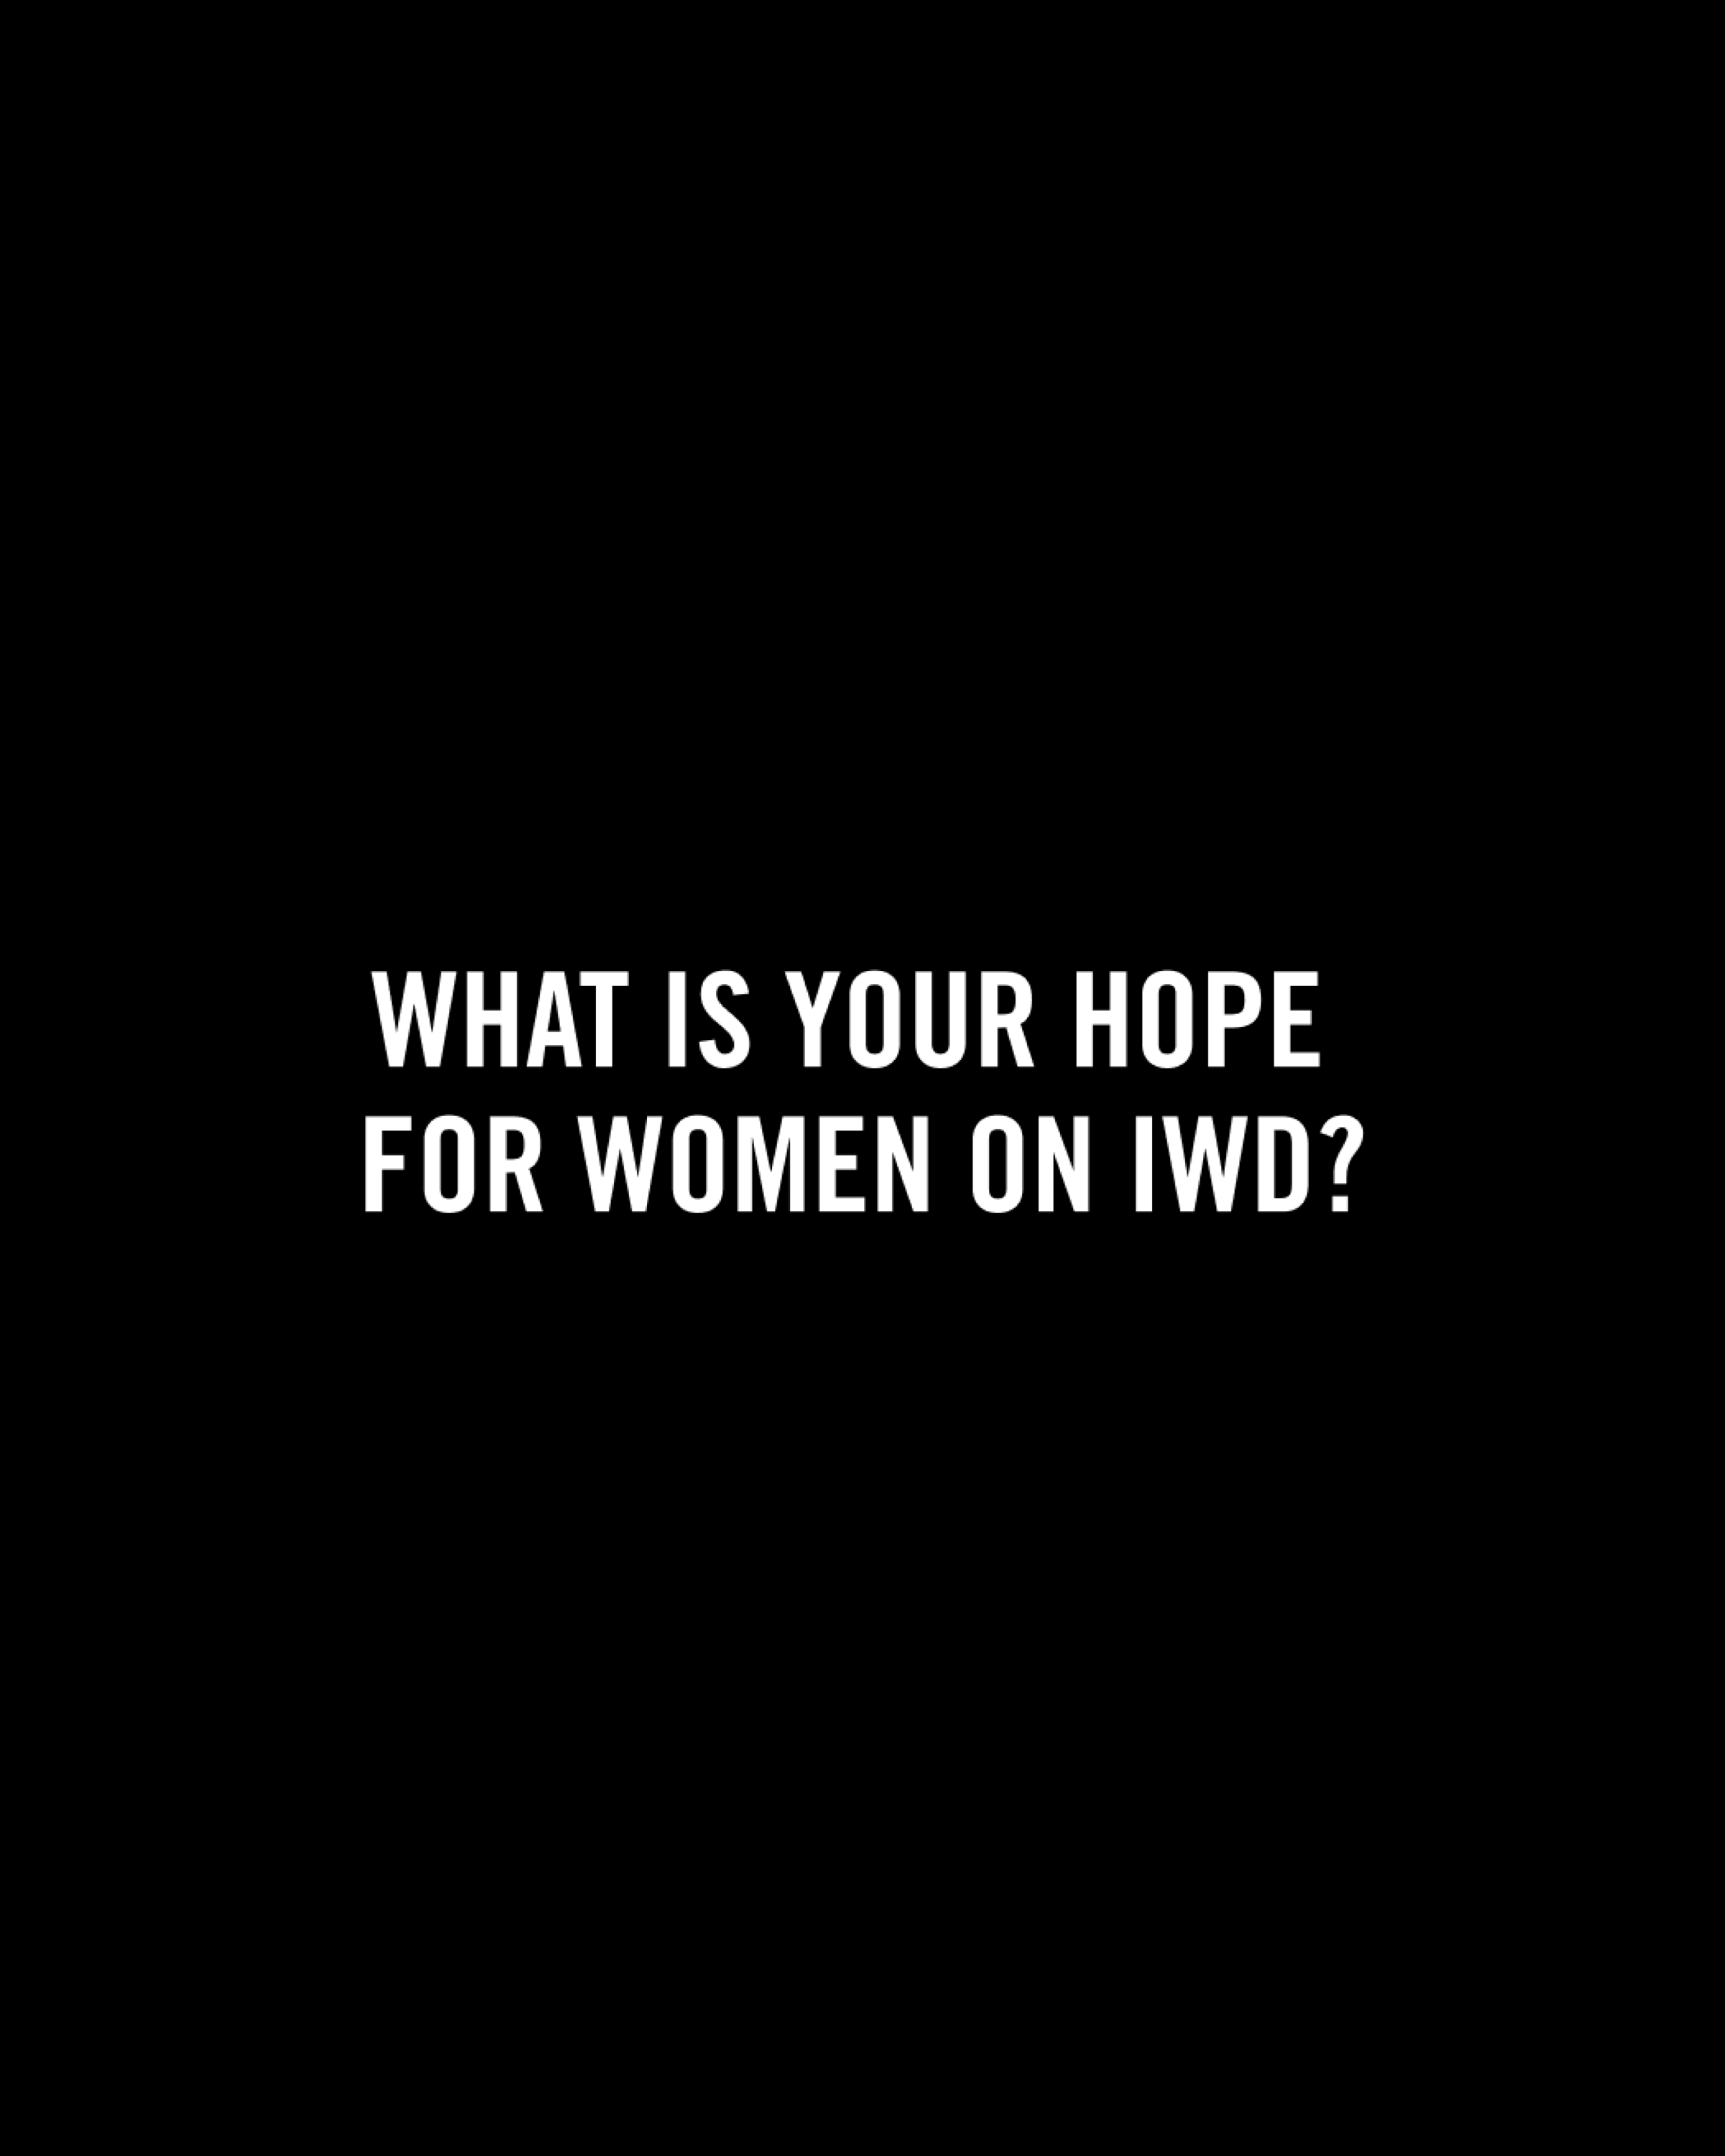 What is your hope for women on IWD?